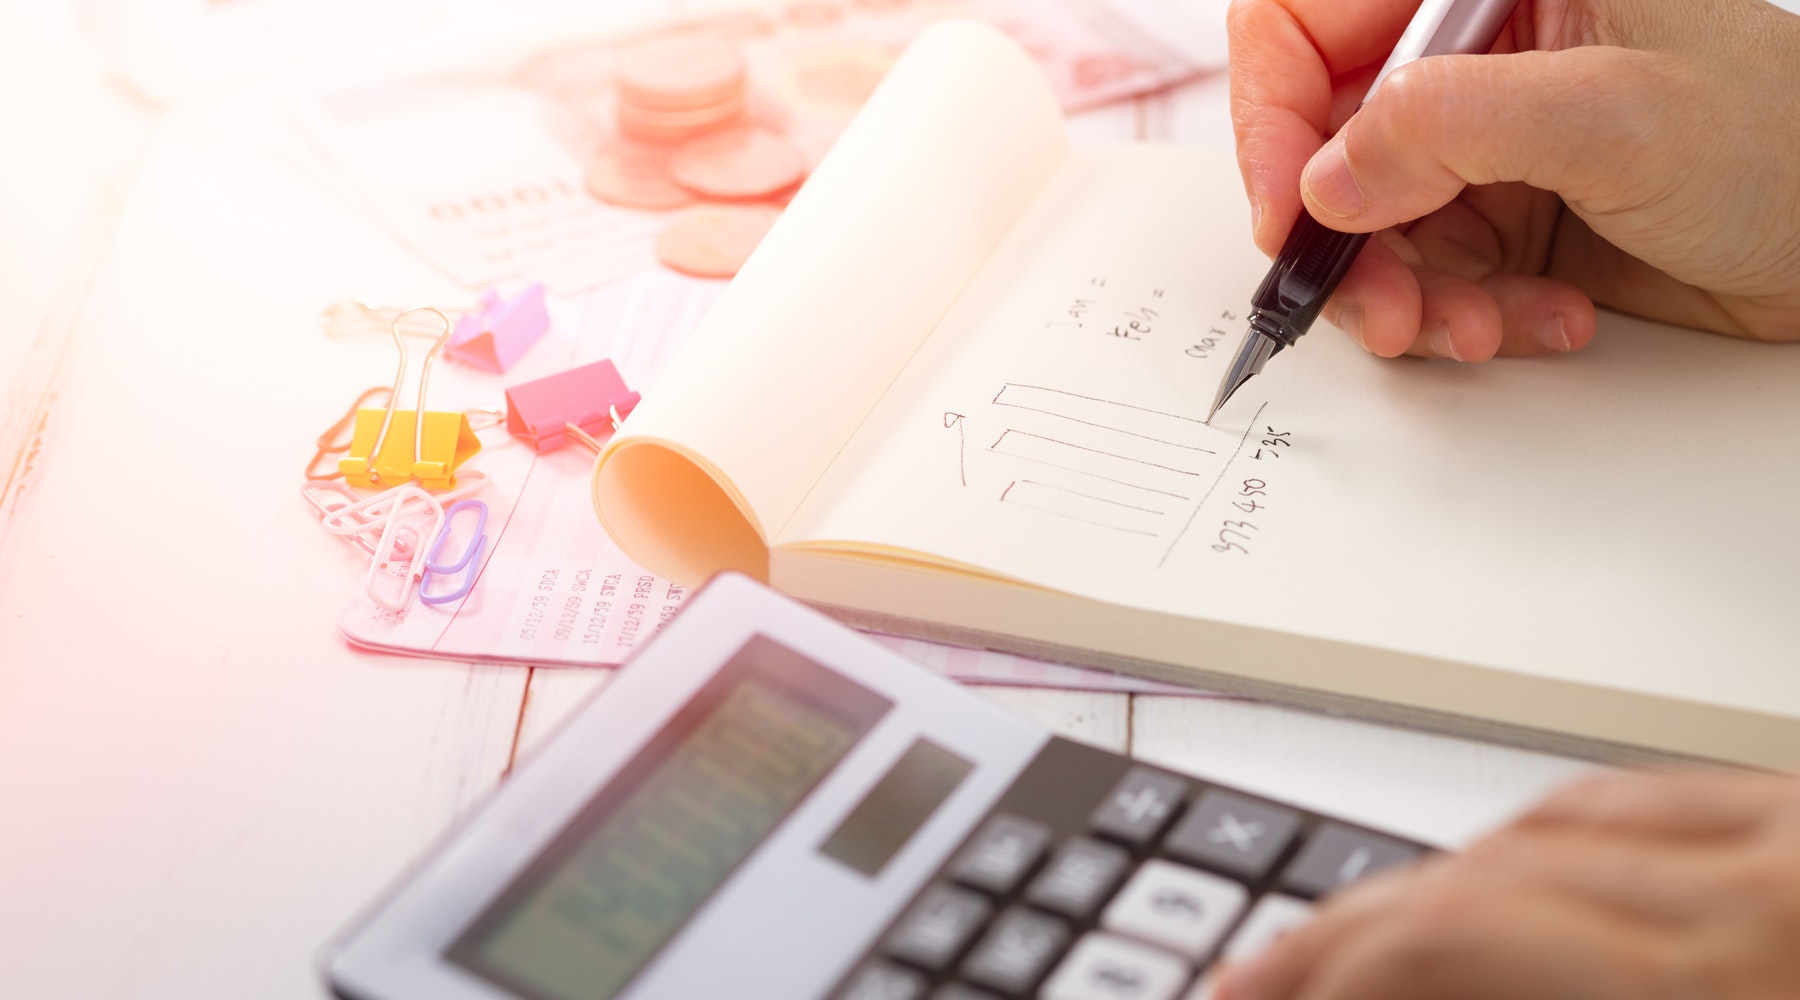 Basic Accounting Skills for Business Owners [Free Course]